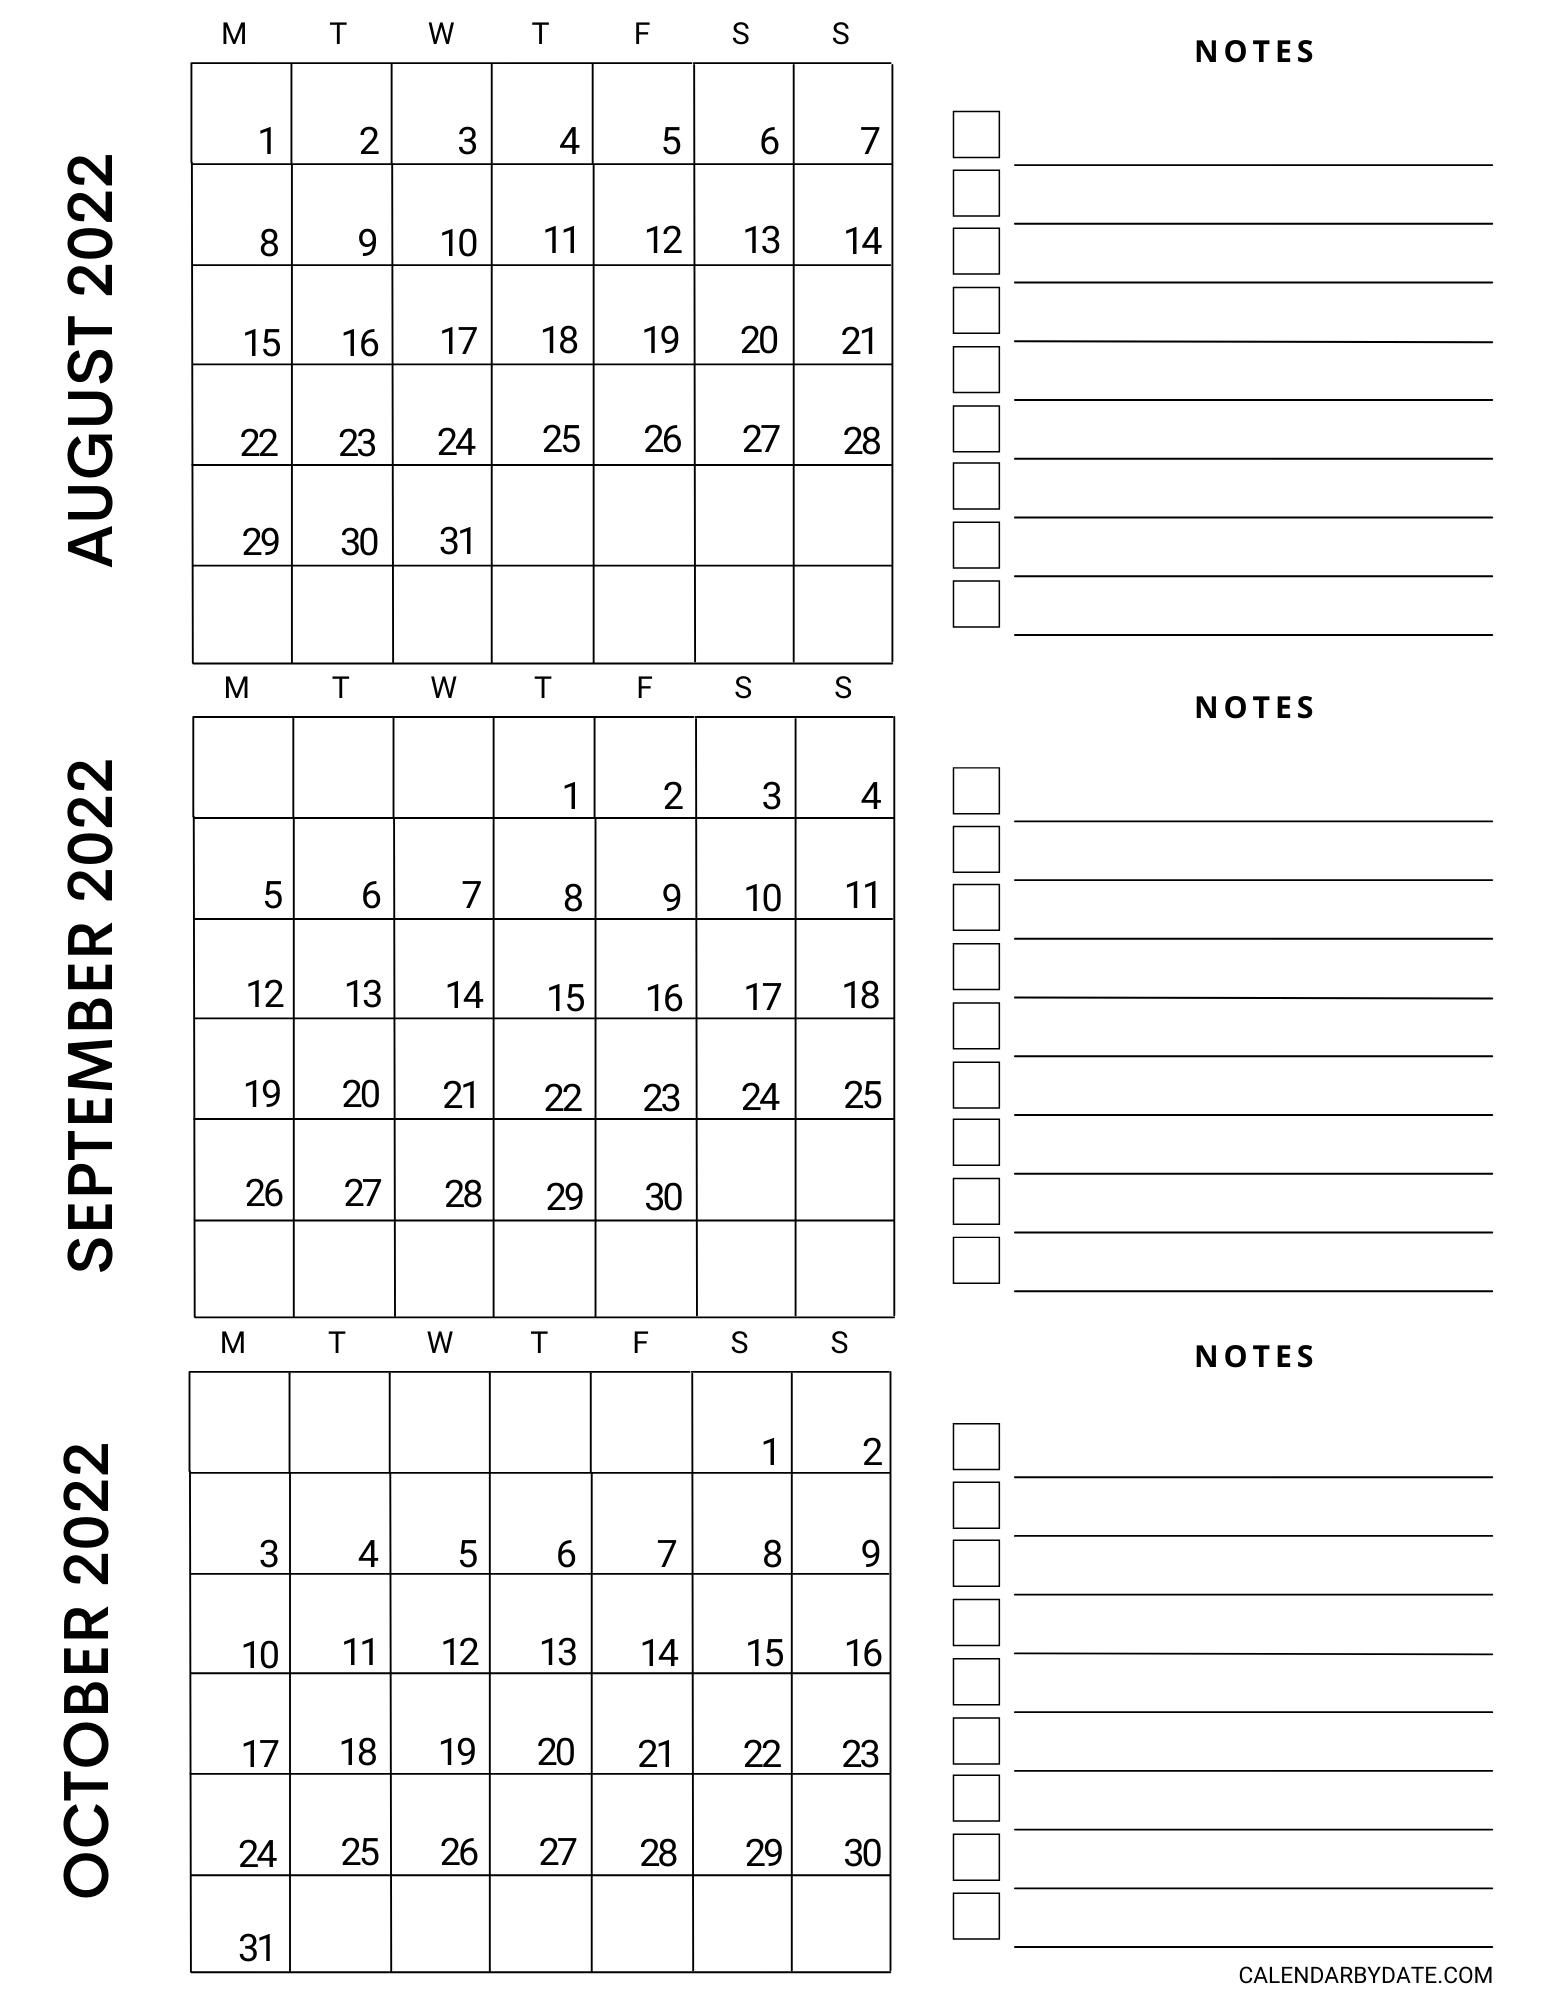 Calendar template with a portrait layout for the months of August to October. The blank notes section with check boxes are for writing important days, dates, and events.